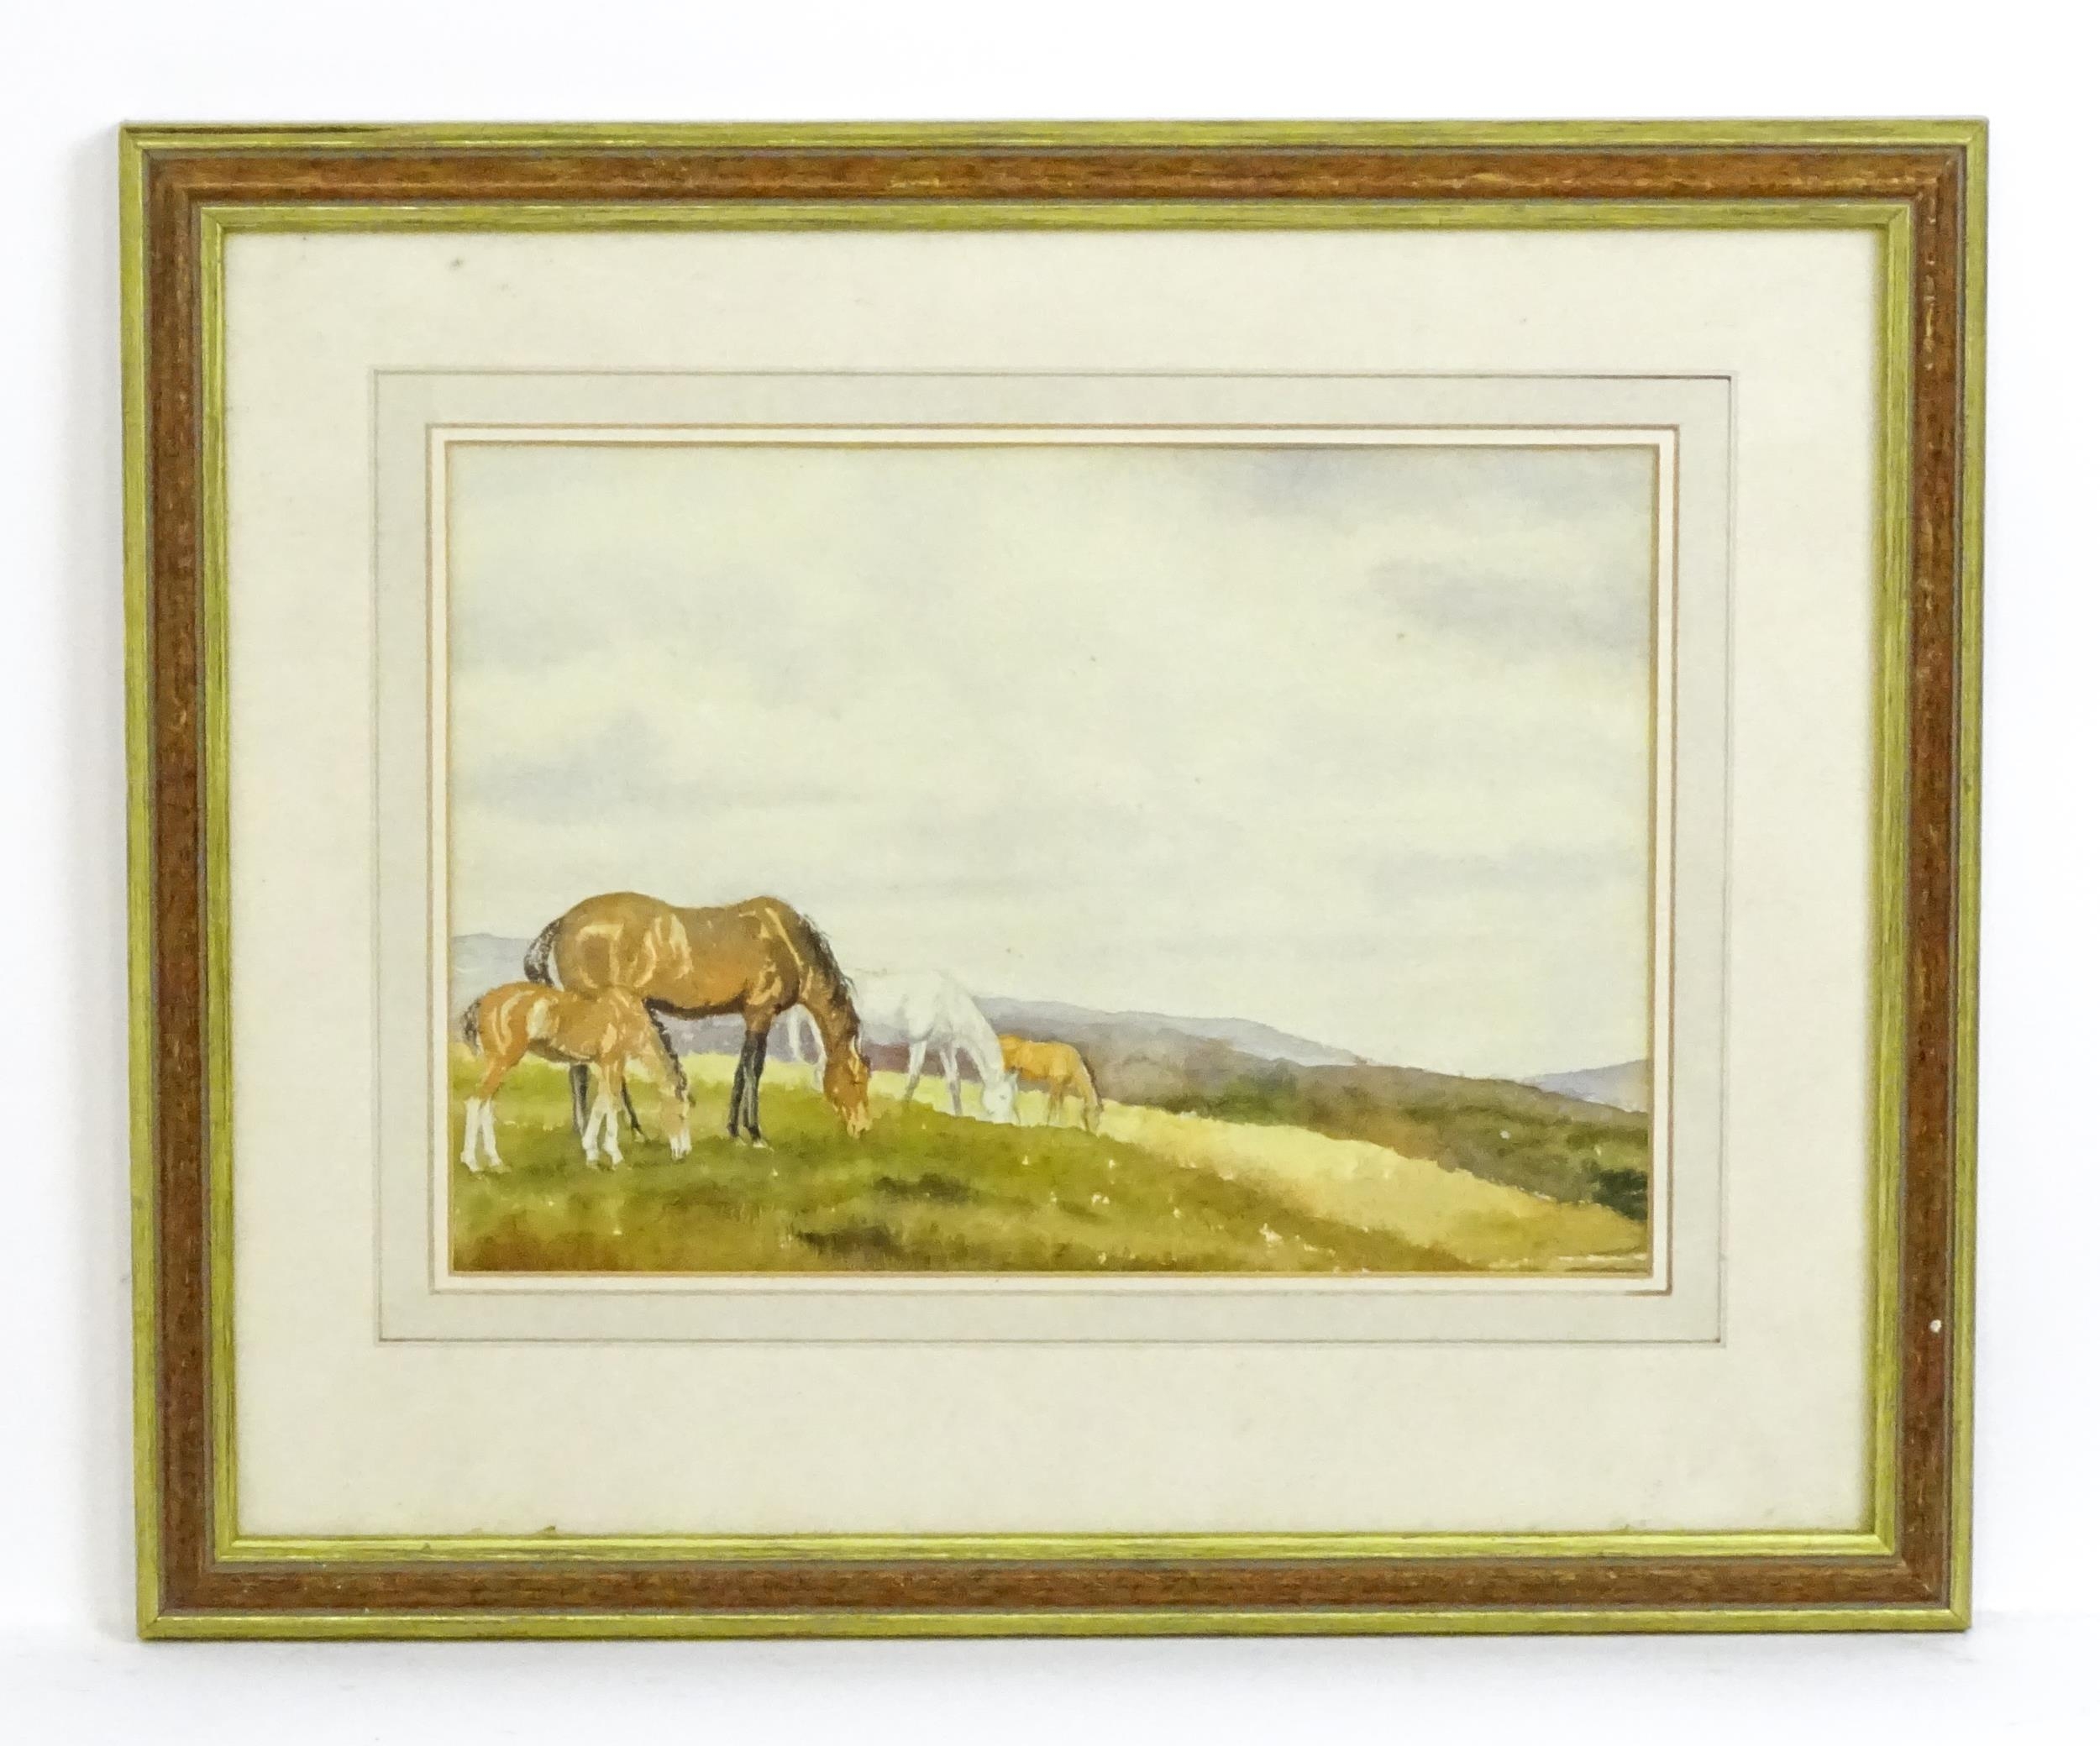 20th century, Watercolour, Horses grazing in a hilly landscape. Approx. 8" x 12" Please Note - we do